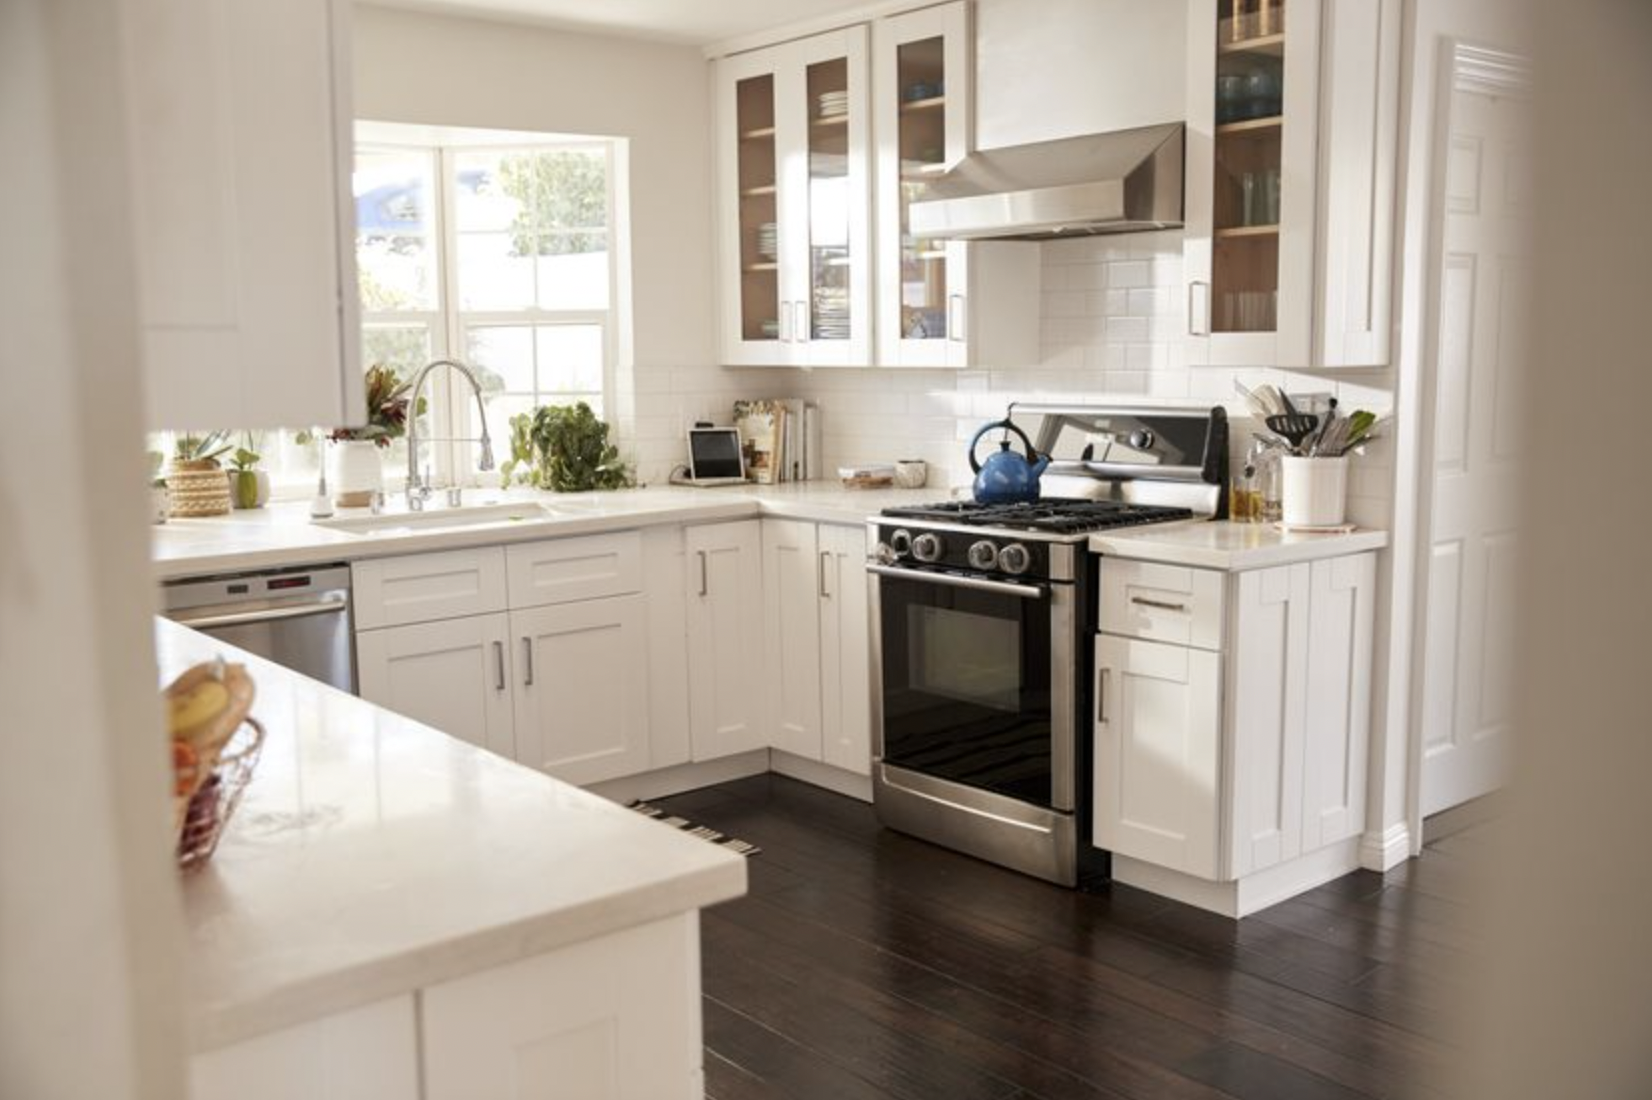 6 Kitchen Staging Mistakes That Can Sabotage the Sale of Your Home